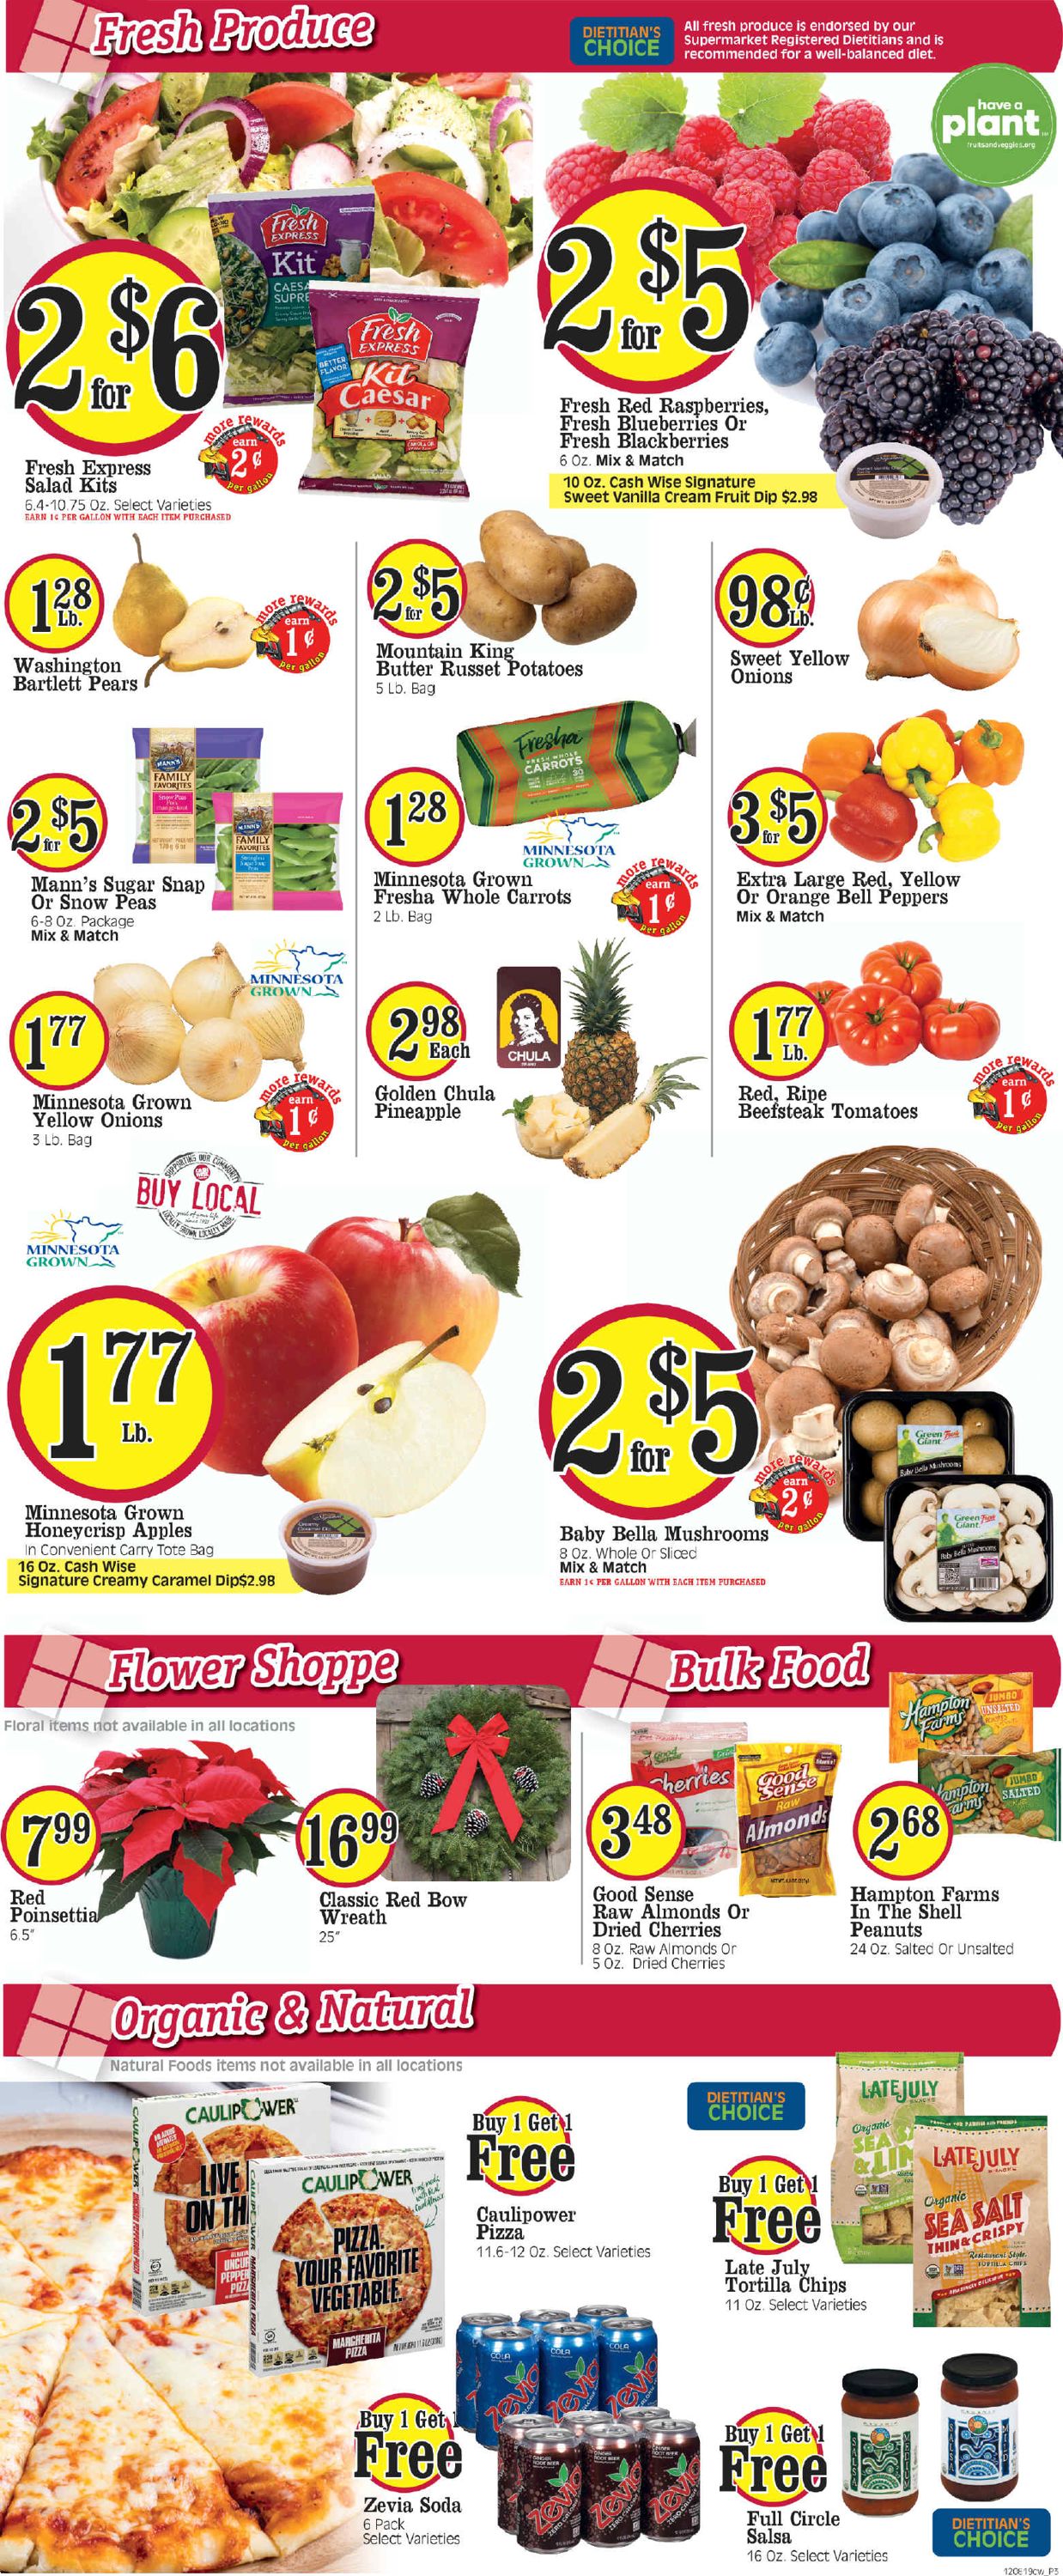 Cash Wise - Holidays Ad 2019 Weekly Ad Circular - valid 12/08-12/14/2019 (Page 3)